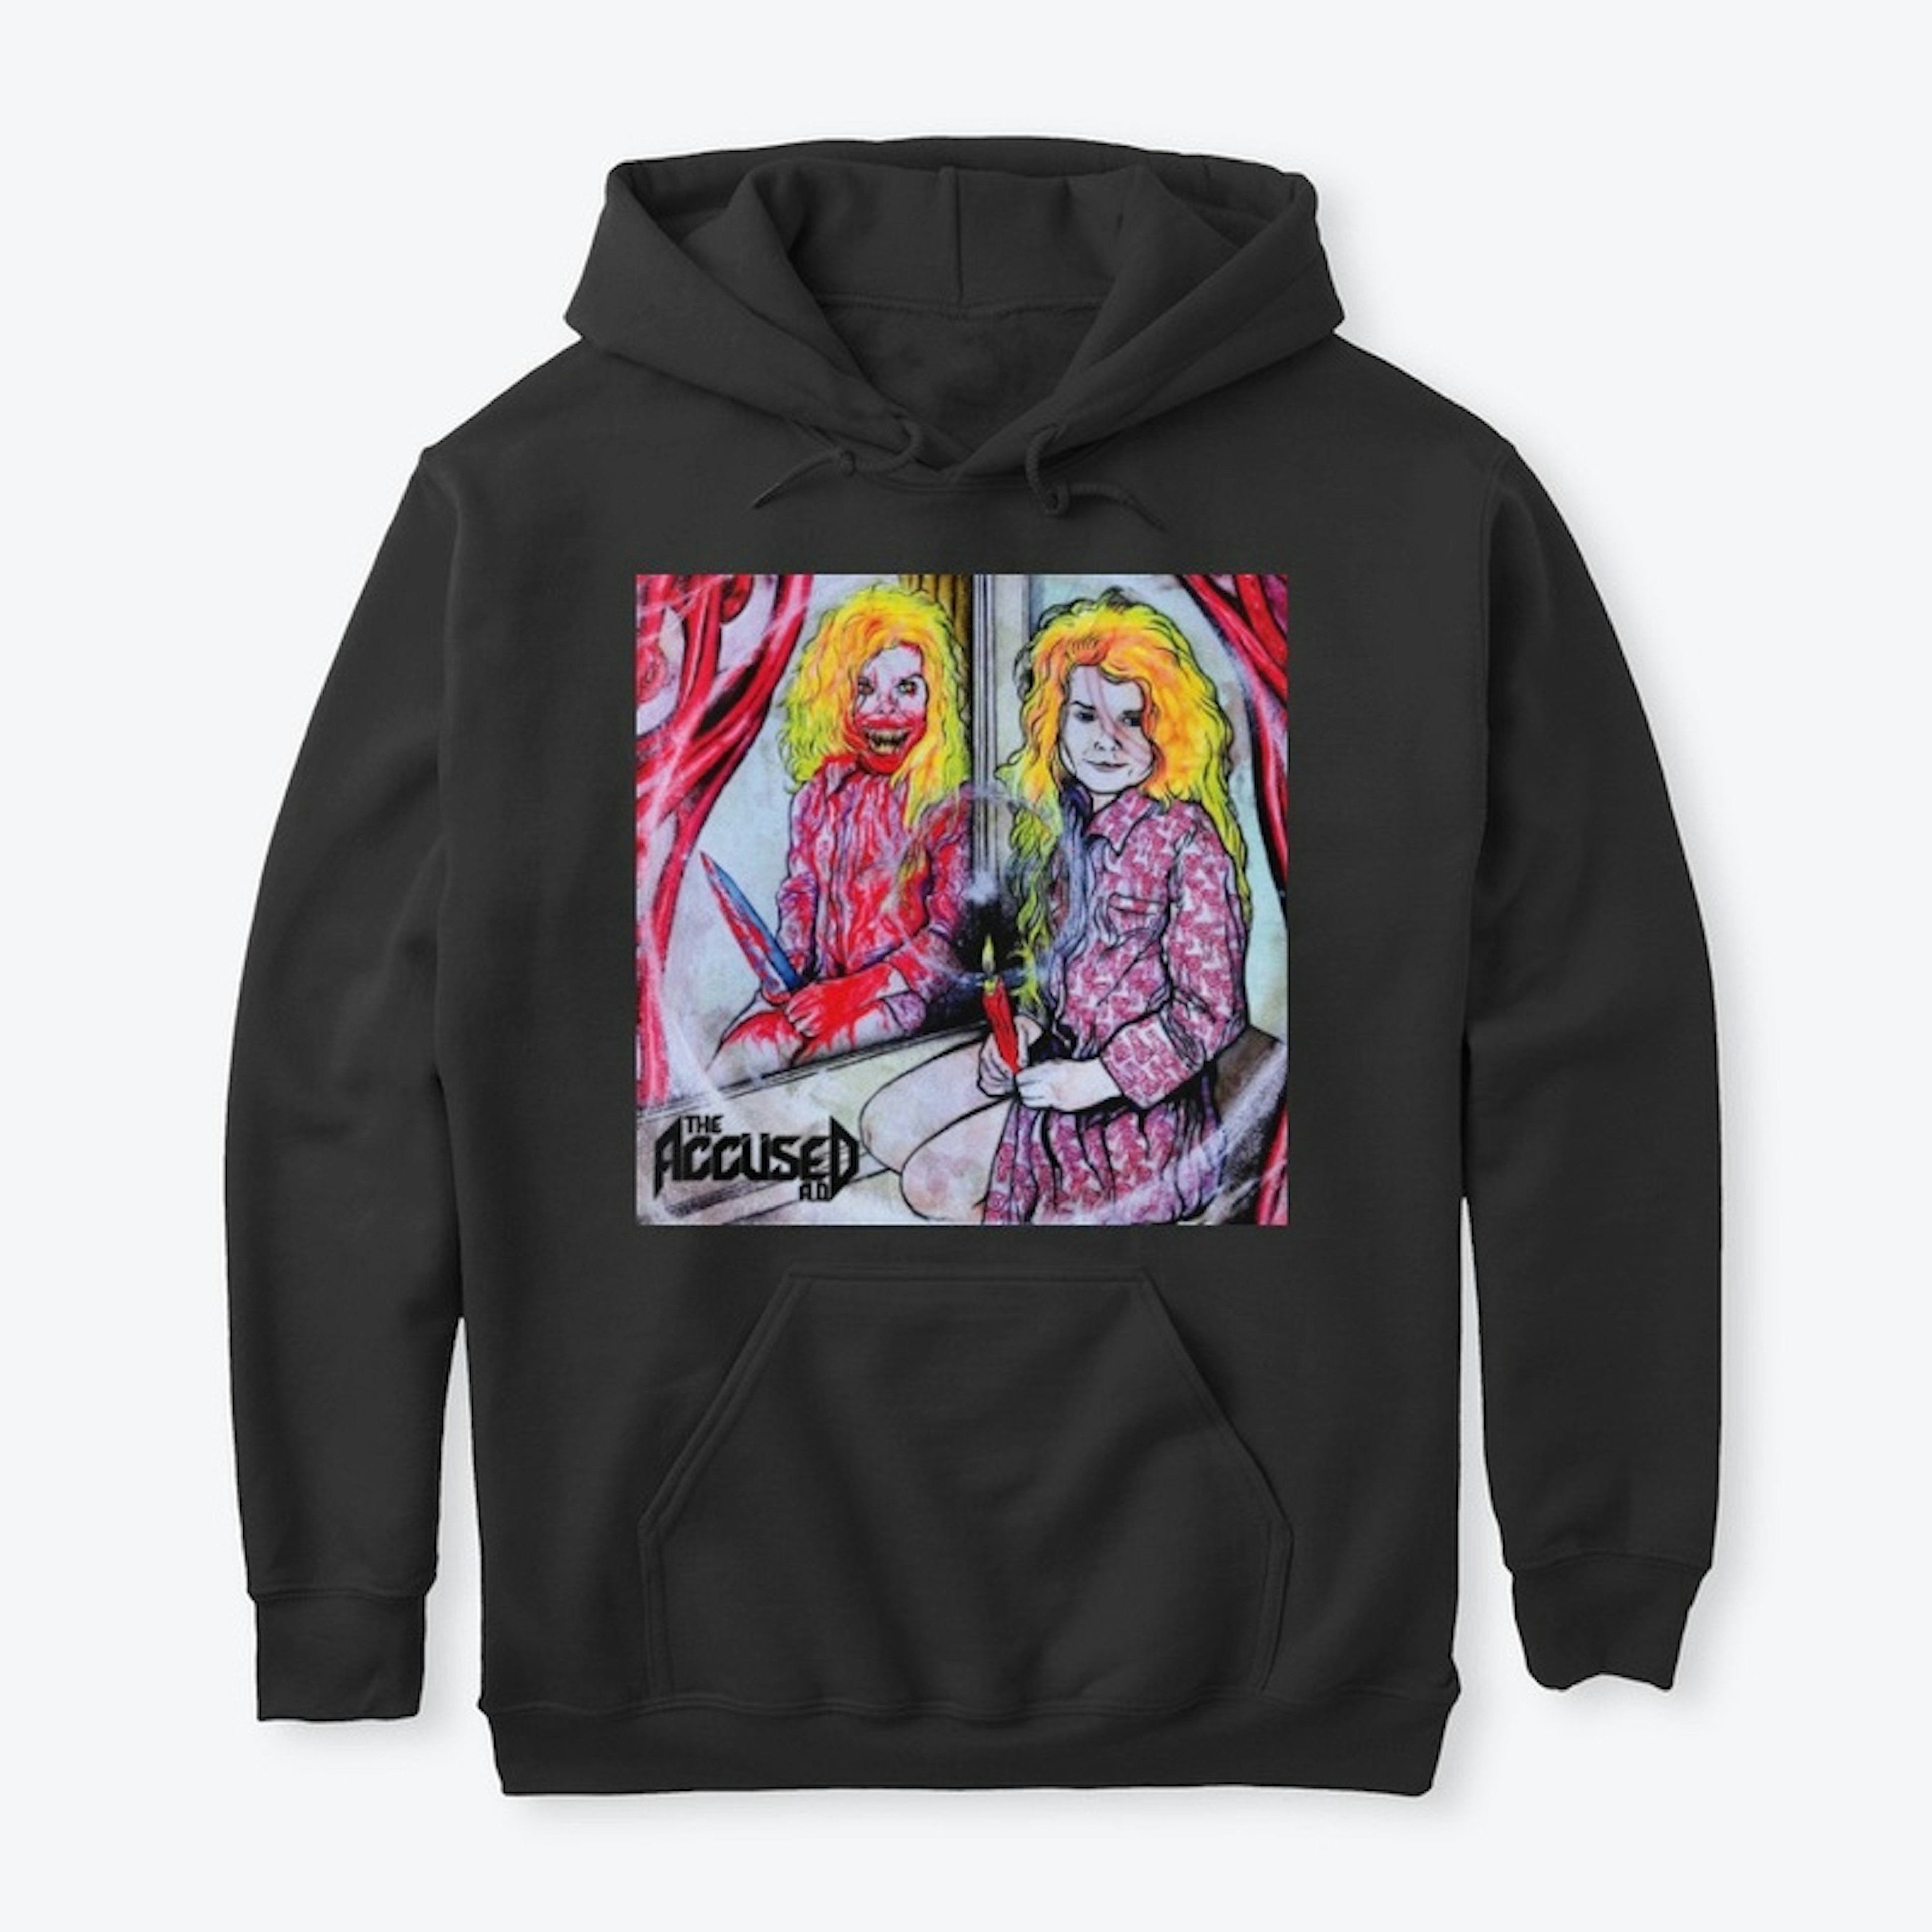 The Accused AD "Ghoul" Pullover Hoodie